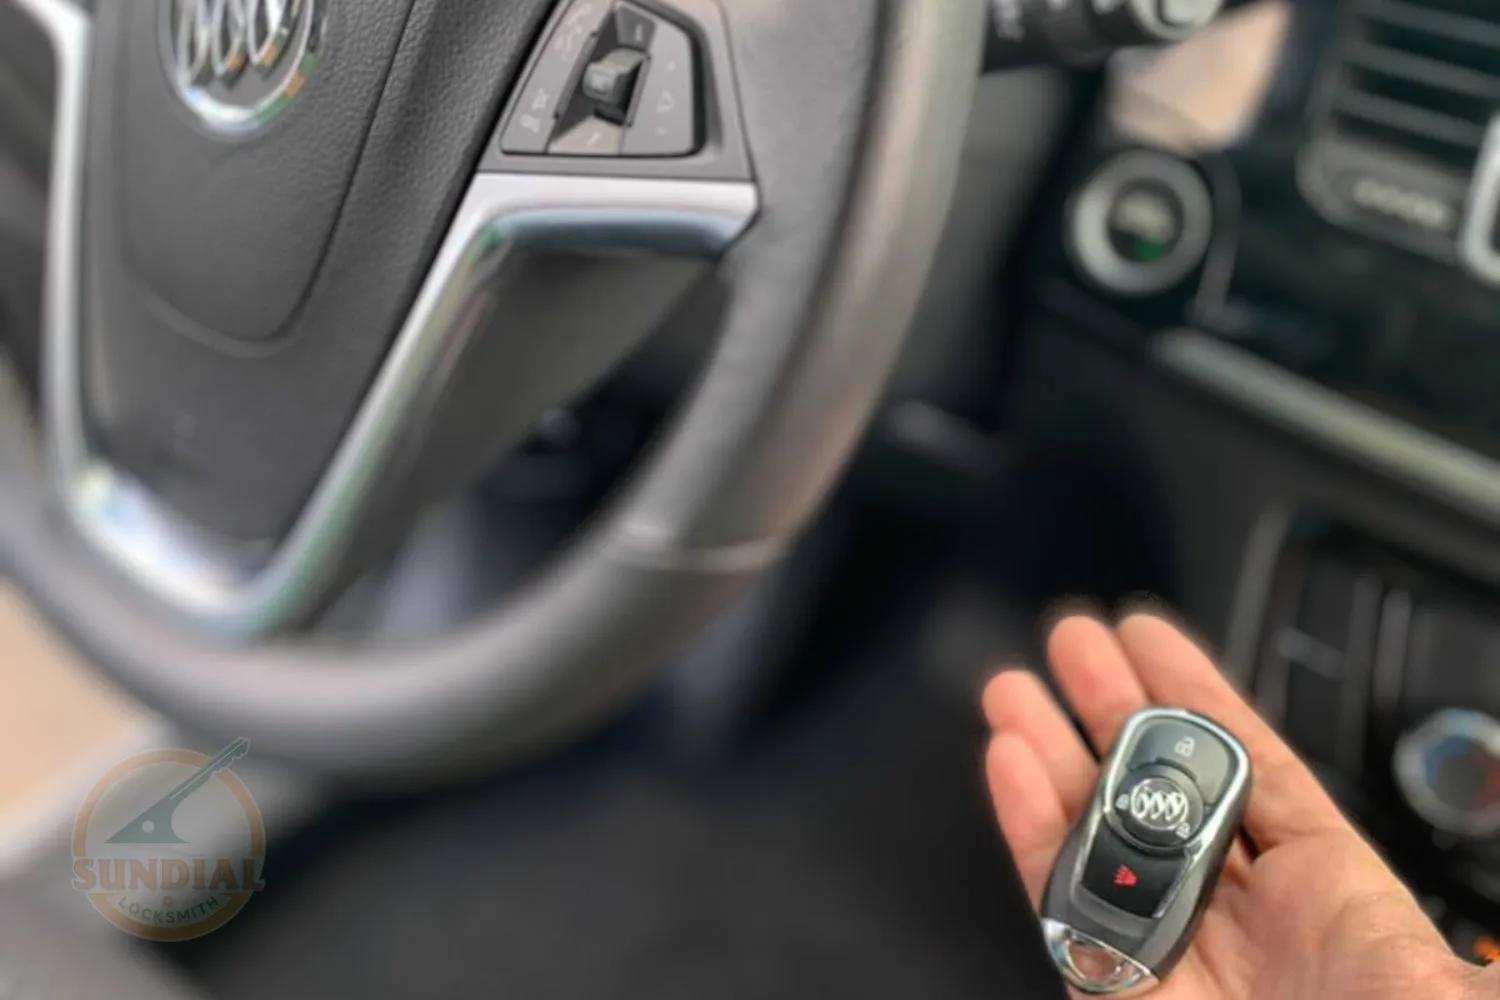 "Hand holding a Buick key fob in front of a Buick steering wheel with multimedia control buttons.